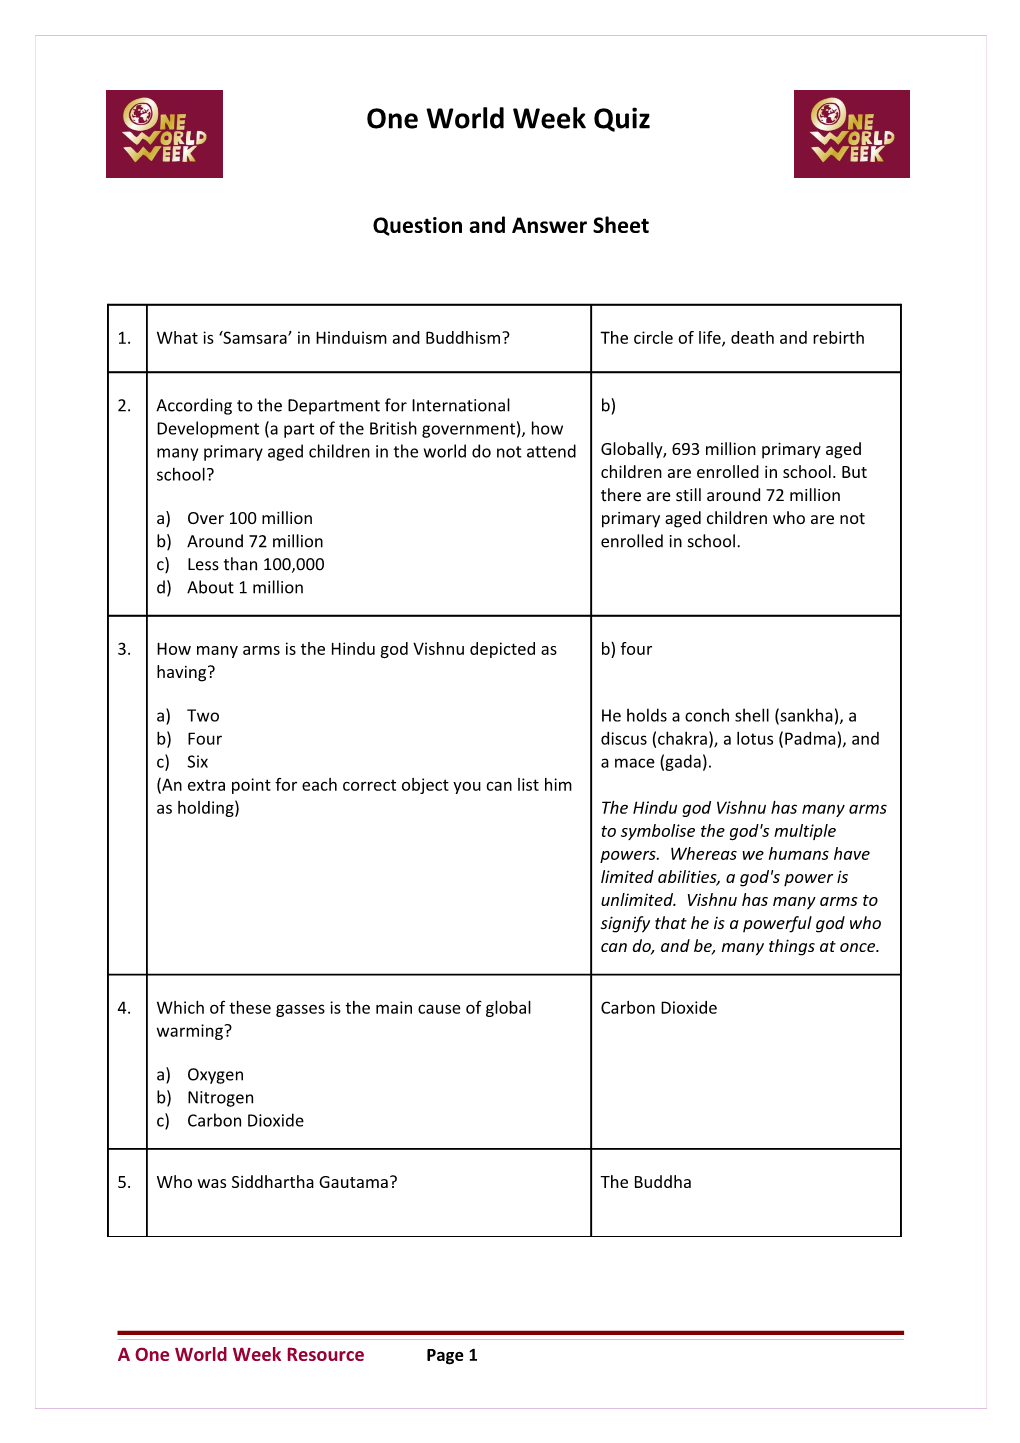 Question and Answer Sheet